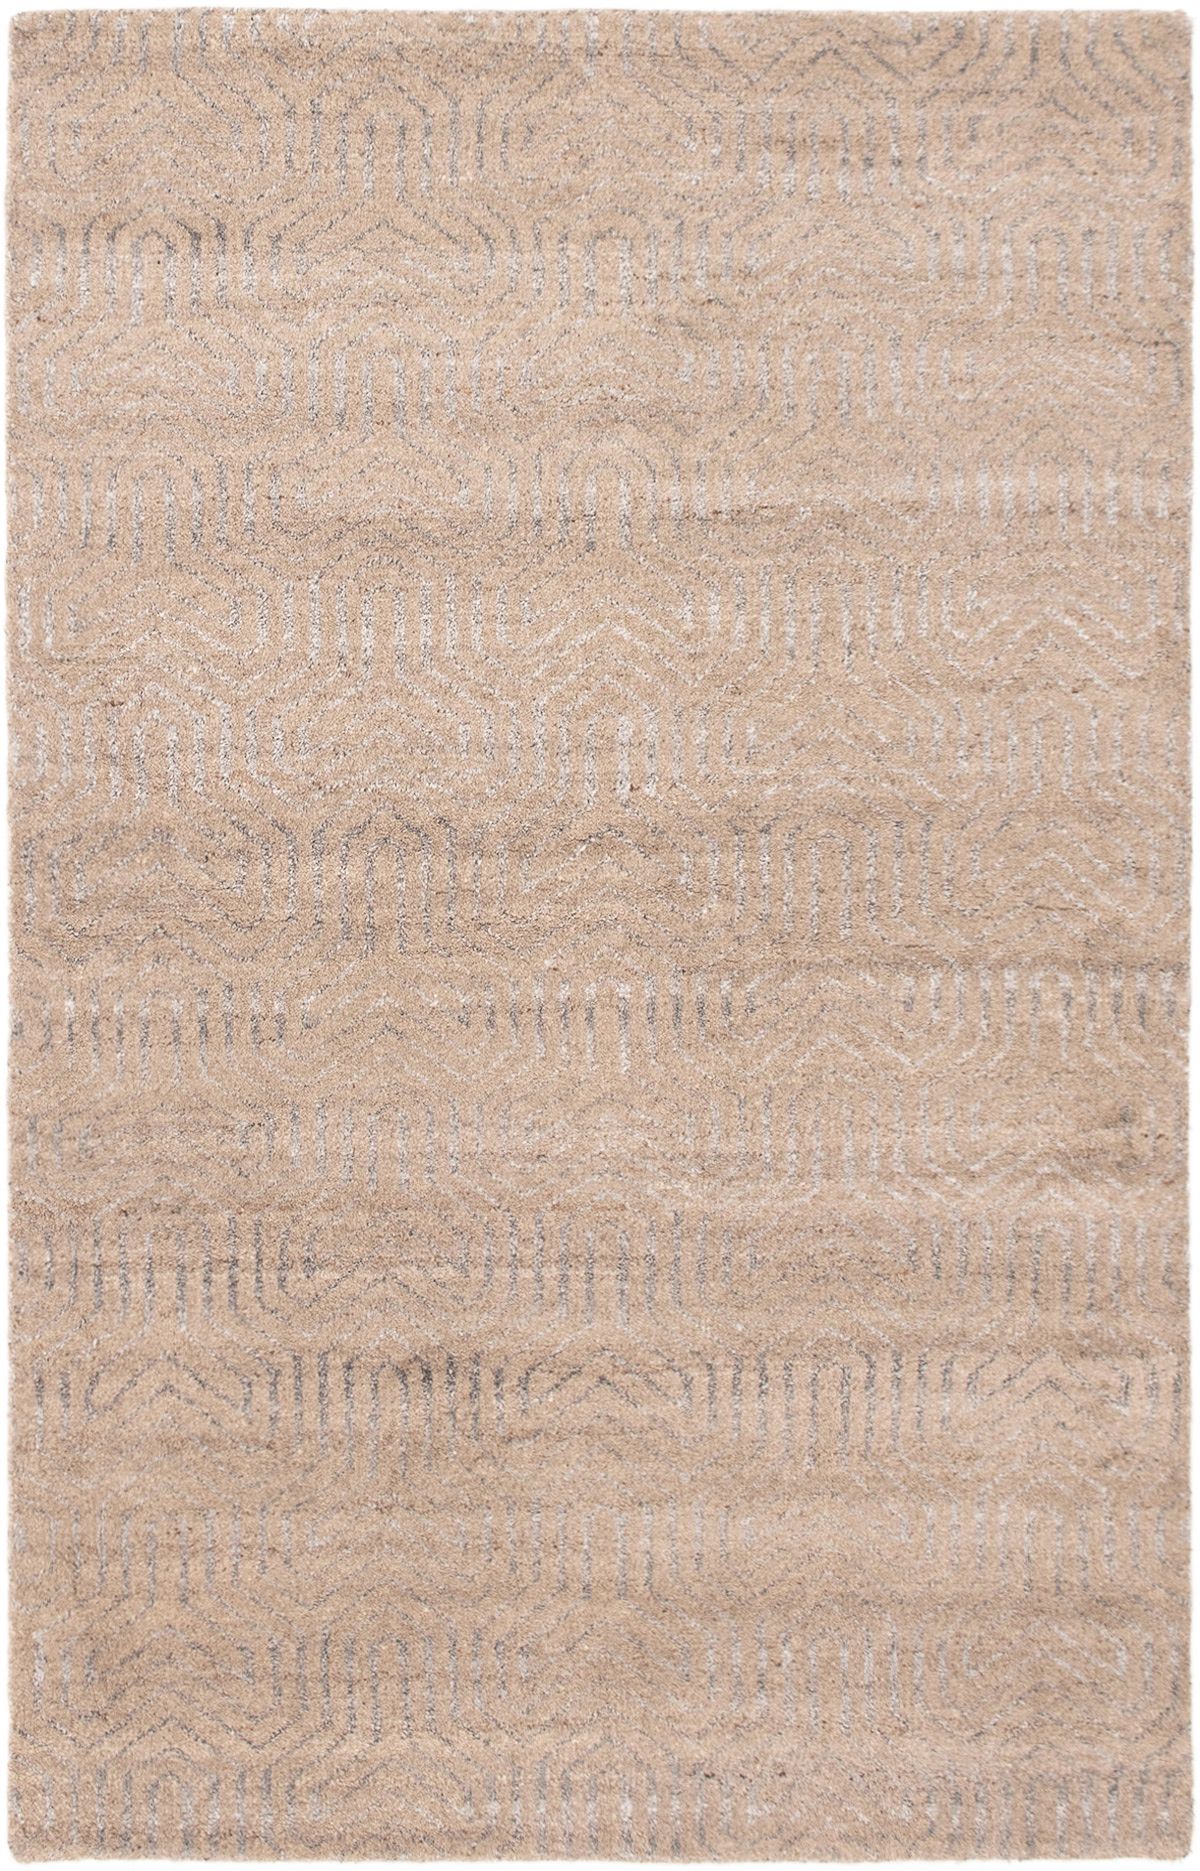 Hand-knotted Tangier Tan Wool Rug 5'1" x 7'11" Size: 5'1" x 7'11"  